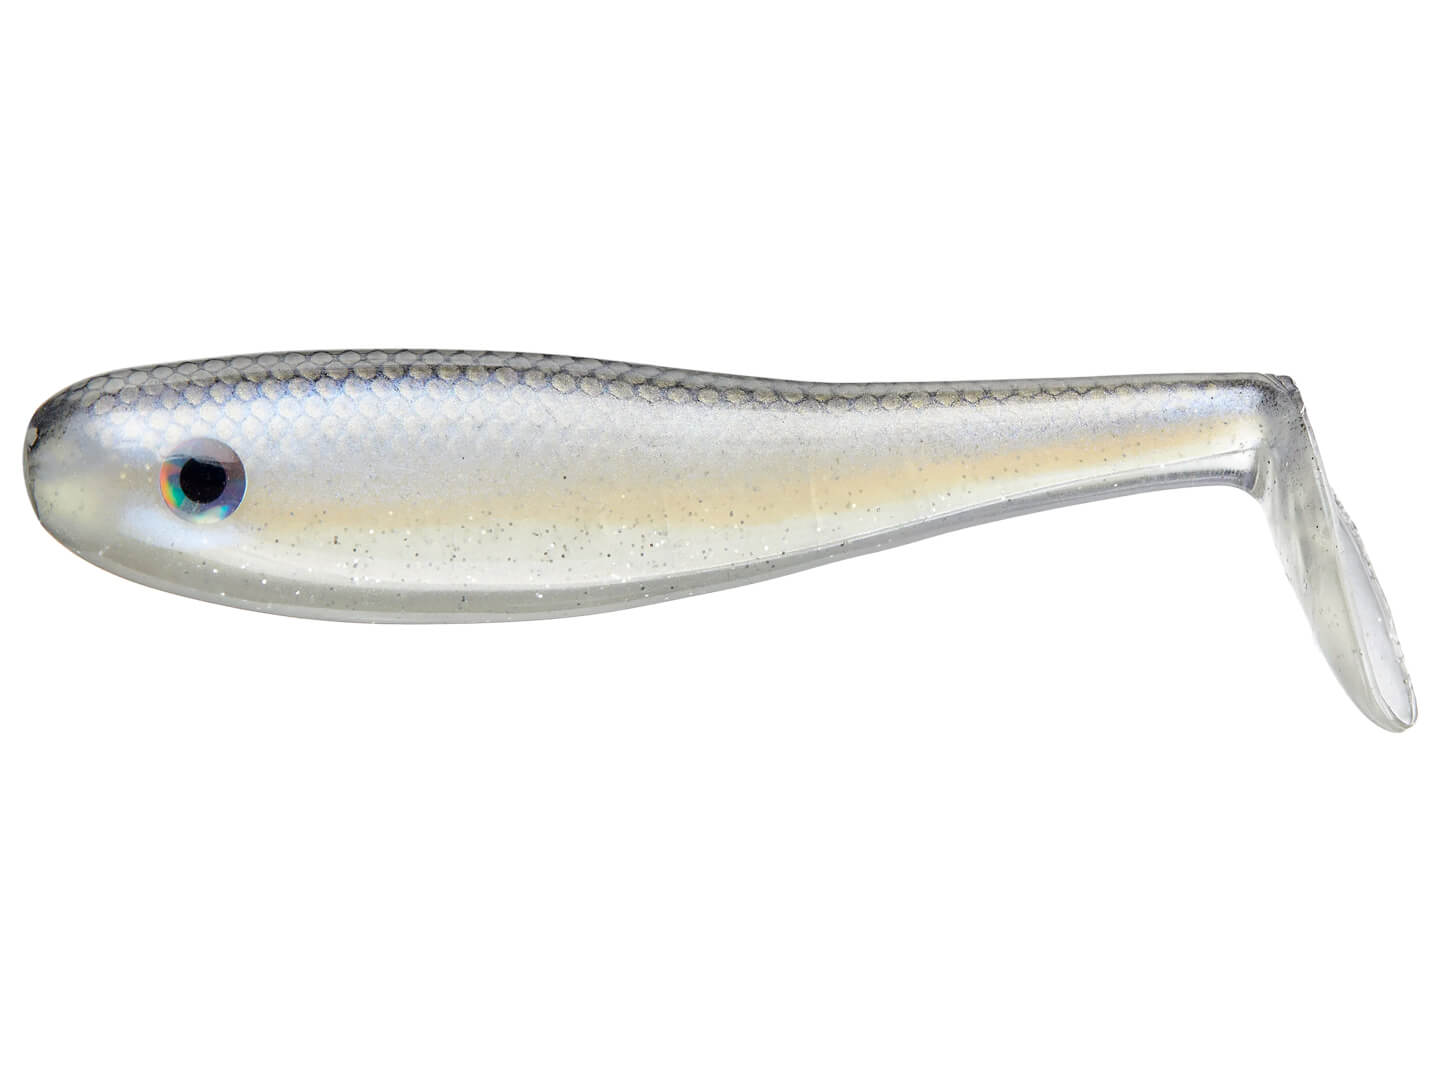 Basstrix Lures Paddle Tail Swimbait – Three Rivers Tackle